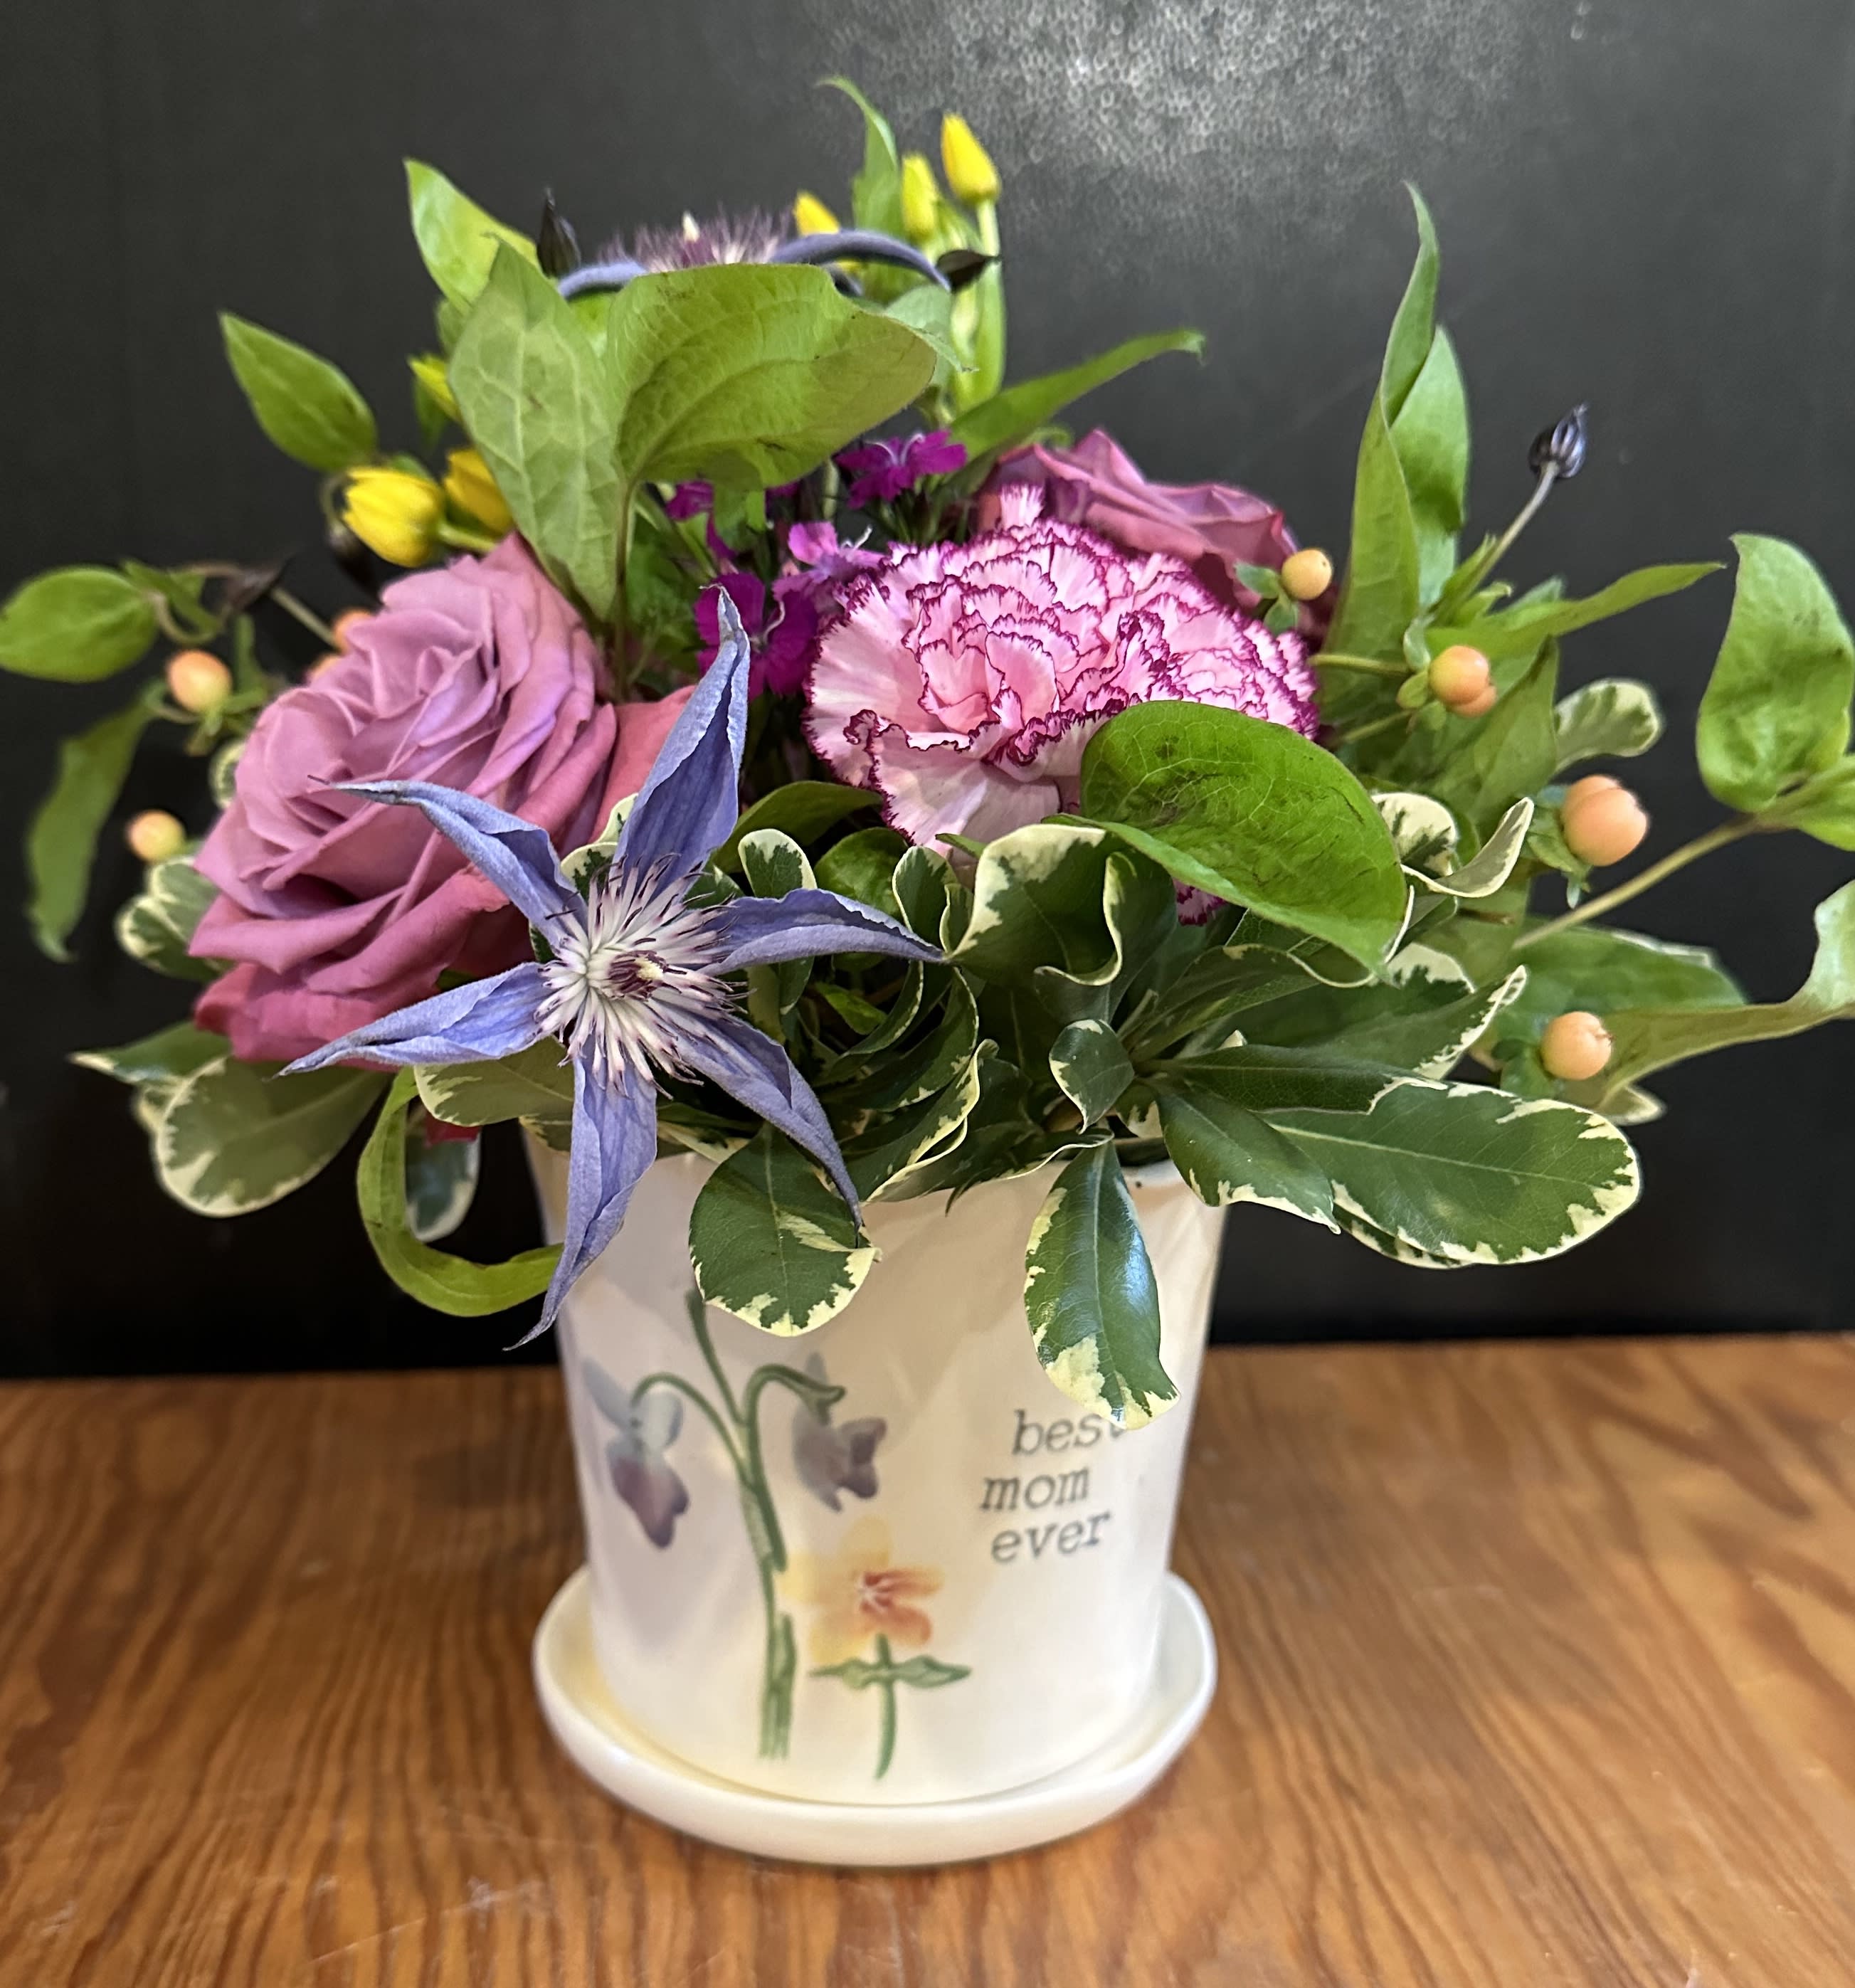 Best Mom - A beautiful selection of garden flowers will be gathered in our Best Mom Ever Container.     FLOWERS AND COLORS WILL VARY . Approximately 11”H  LIMITED QUANTITIES 